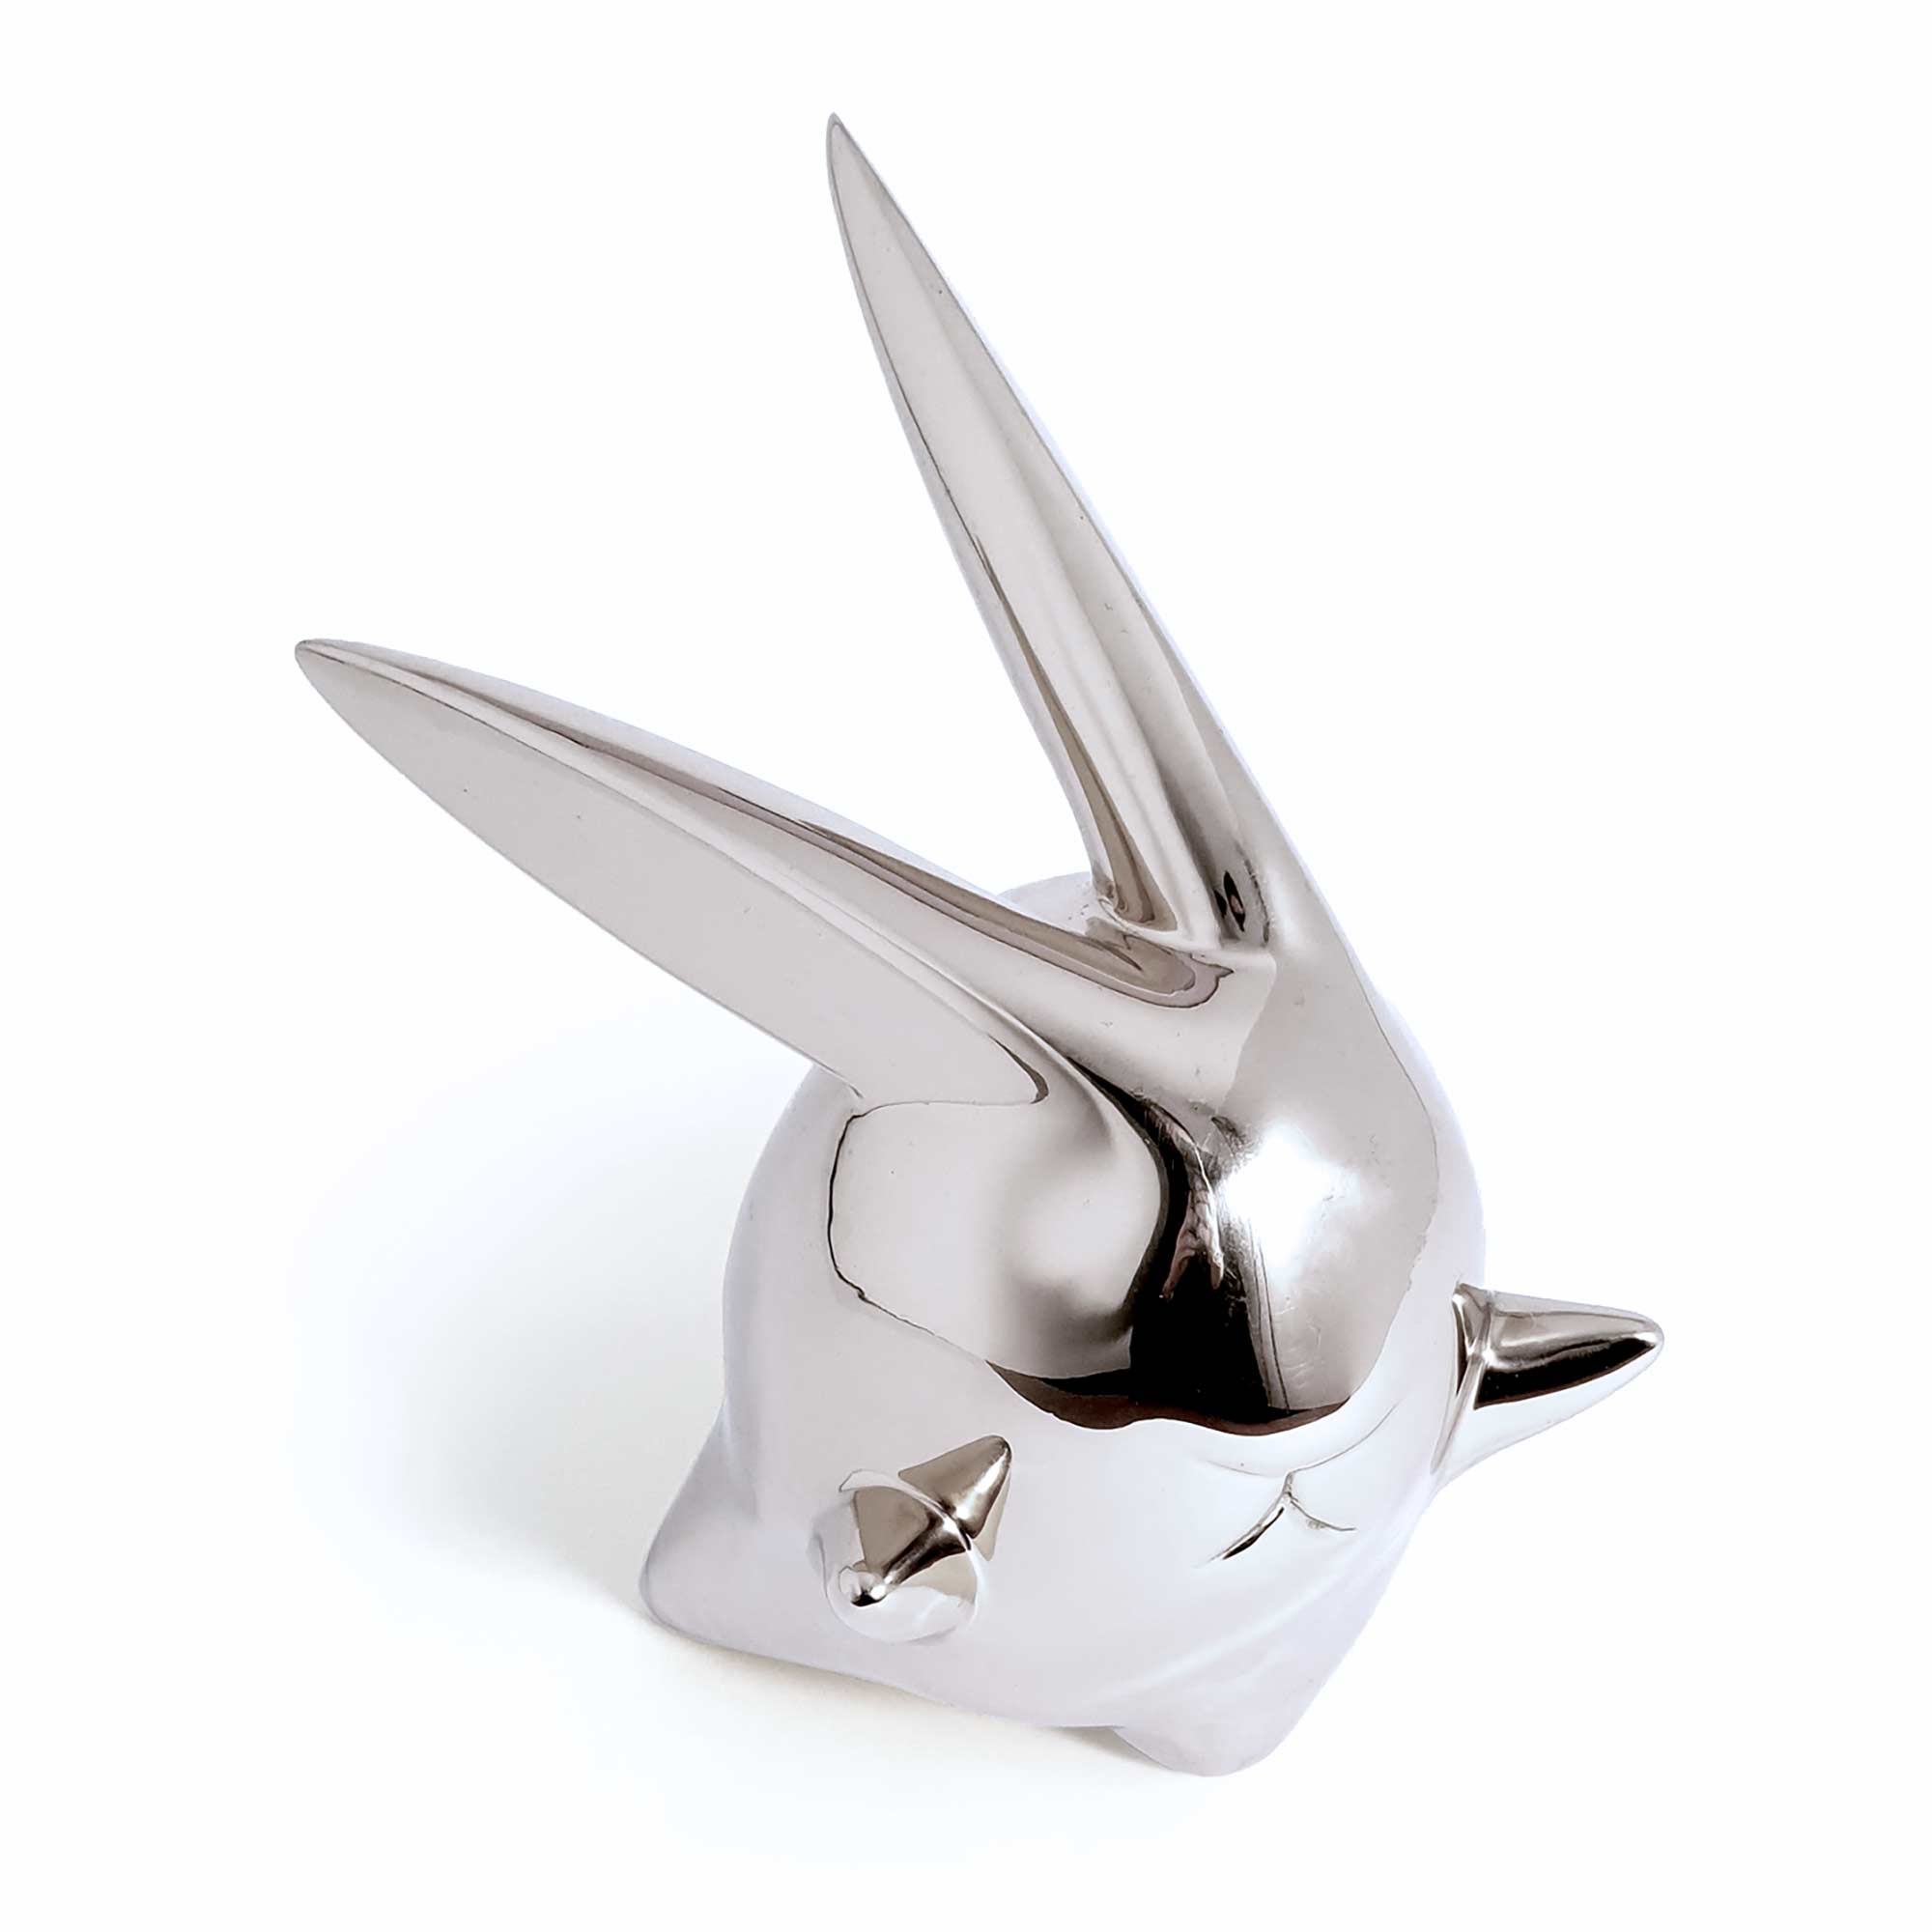 Flight or Fight, bunny rabbit sculpture, Mirror Polished Stainless Steel Sculpture, by artist Ferdi B Dick, top view